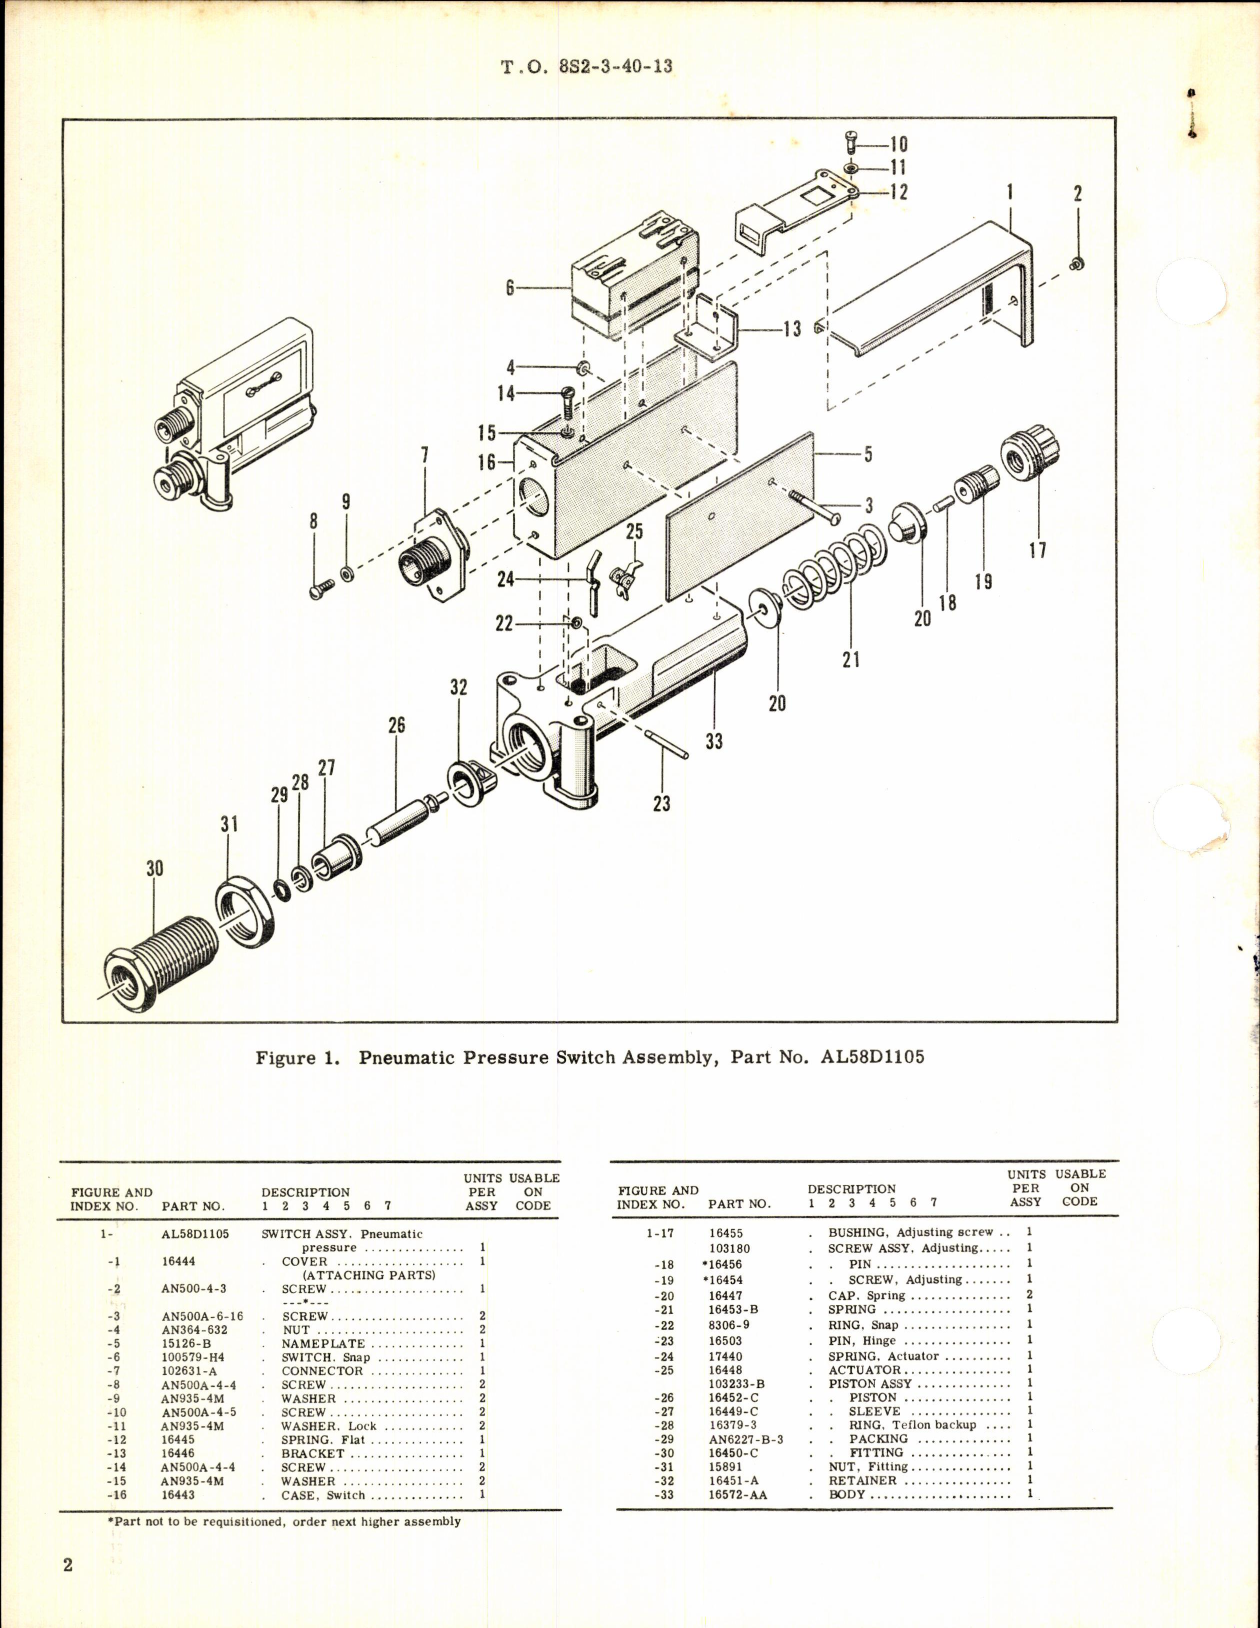 Sample page 2 from AirCorps Library document: Pneumatic Pressure Switch Part No AL-58D1105